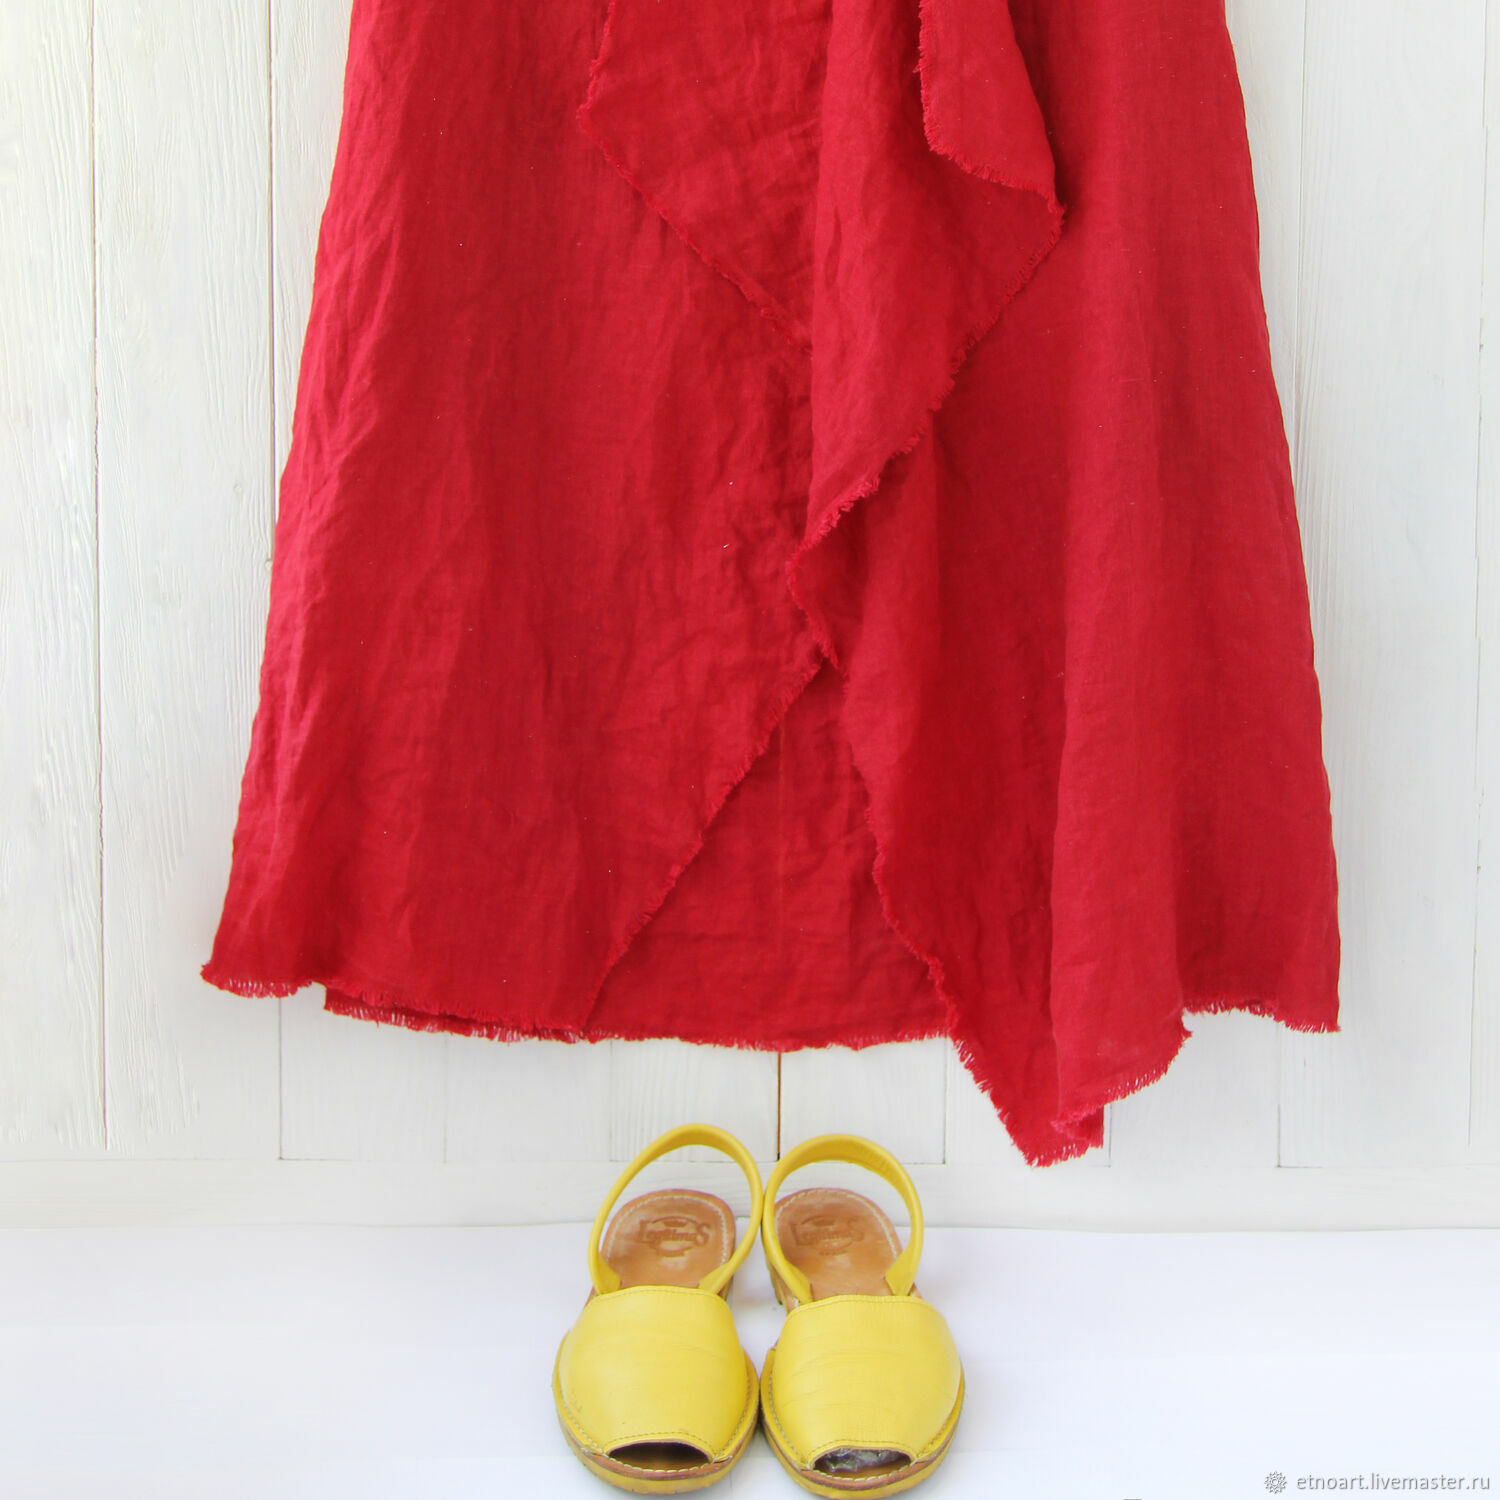 Boho style skirt made of red linen, Skirts, Tomsk,  Фото №1